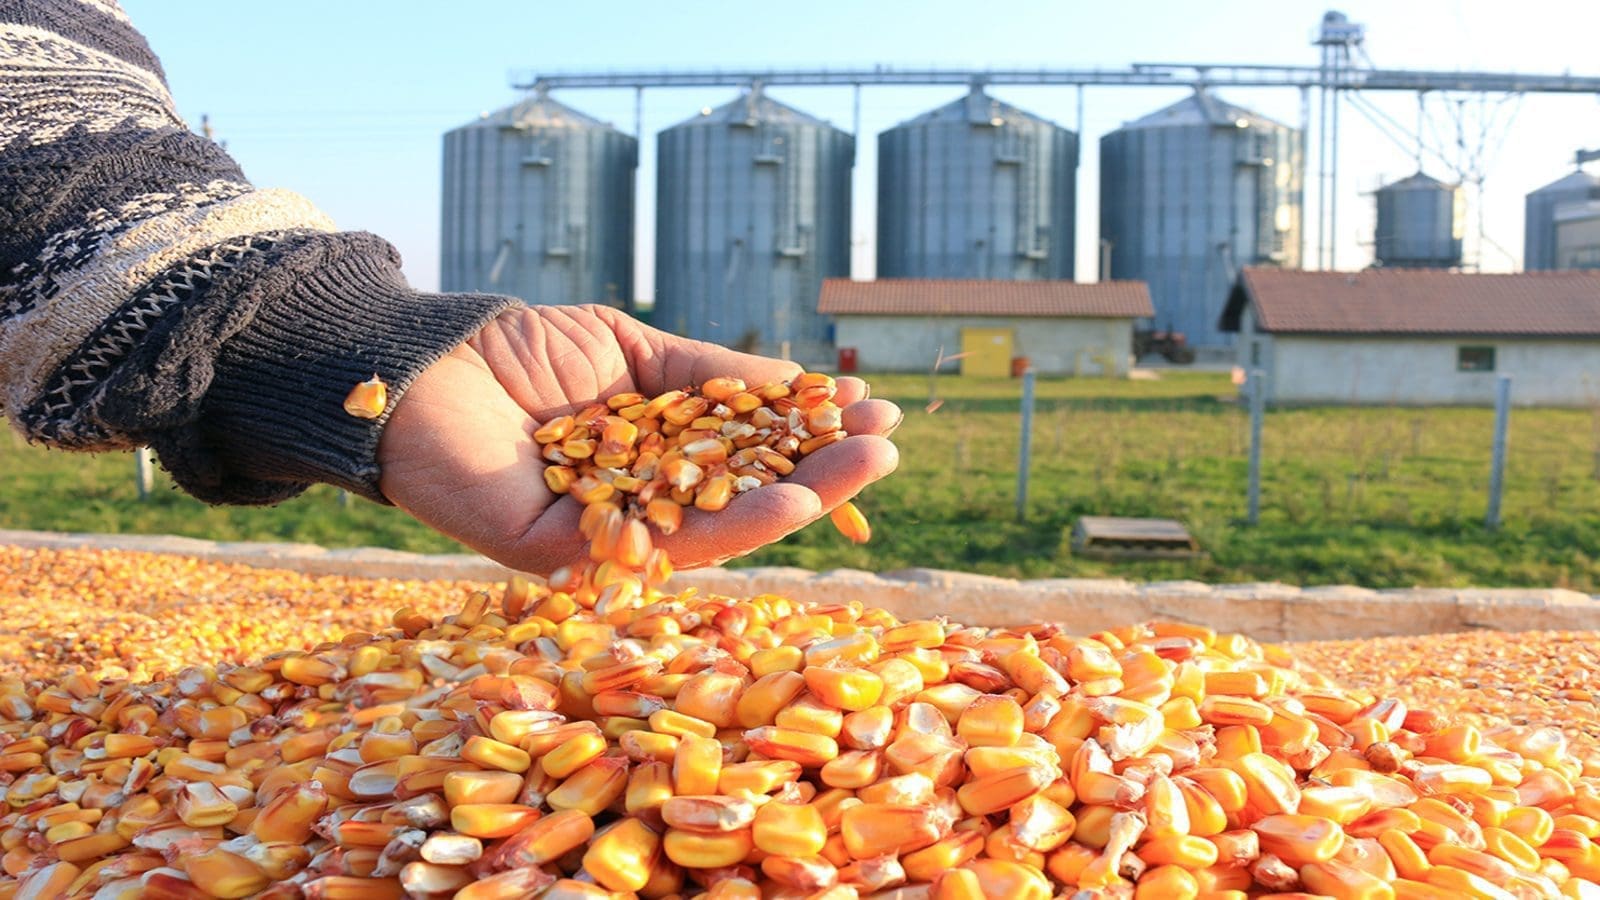 Brazil set for another record-breaking grain harvest in 2023, corn production forecast up by 8%